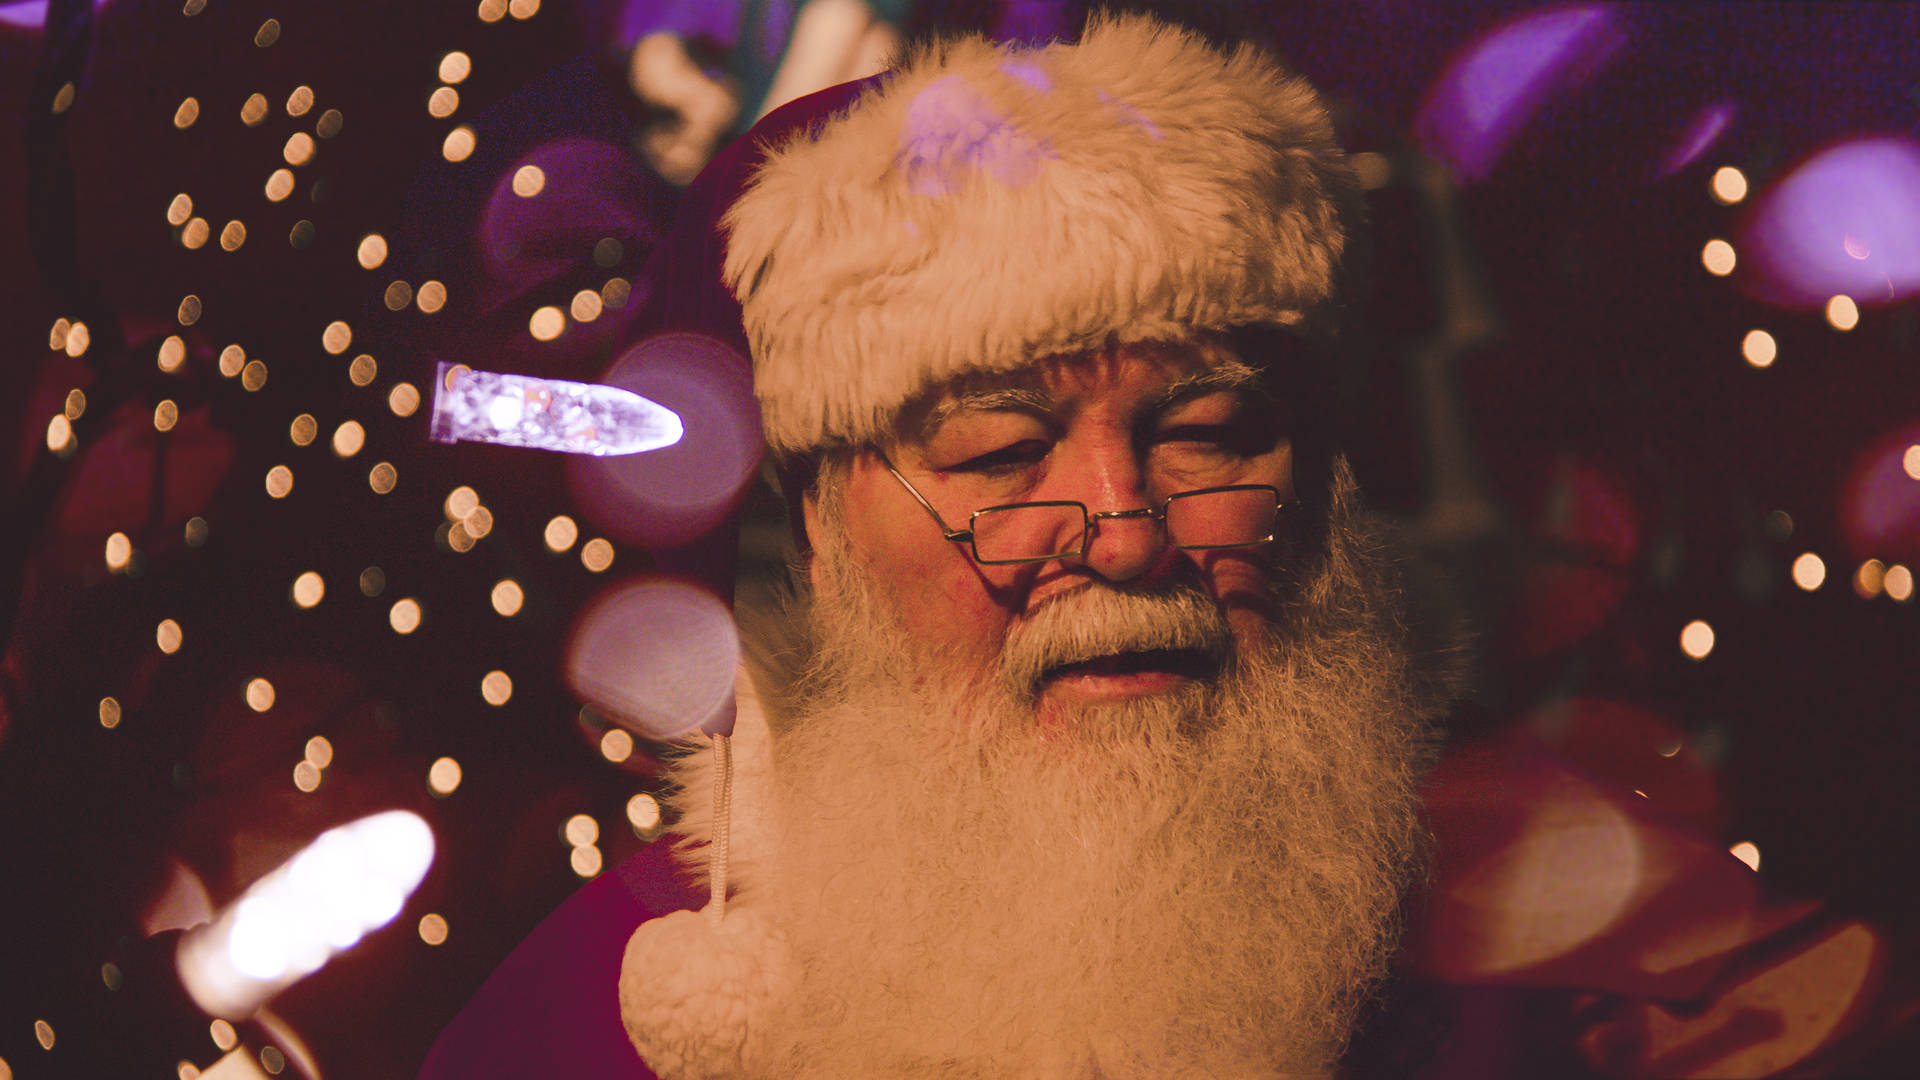 3840X2160 Santa Claus Wallpaper and Background